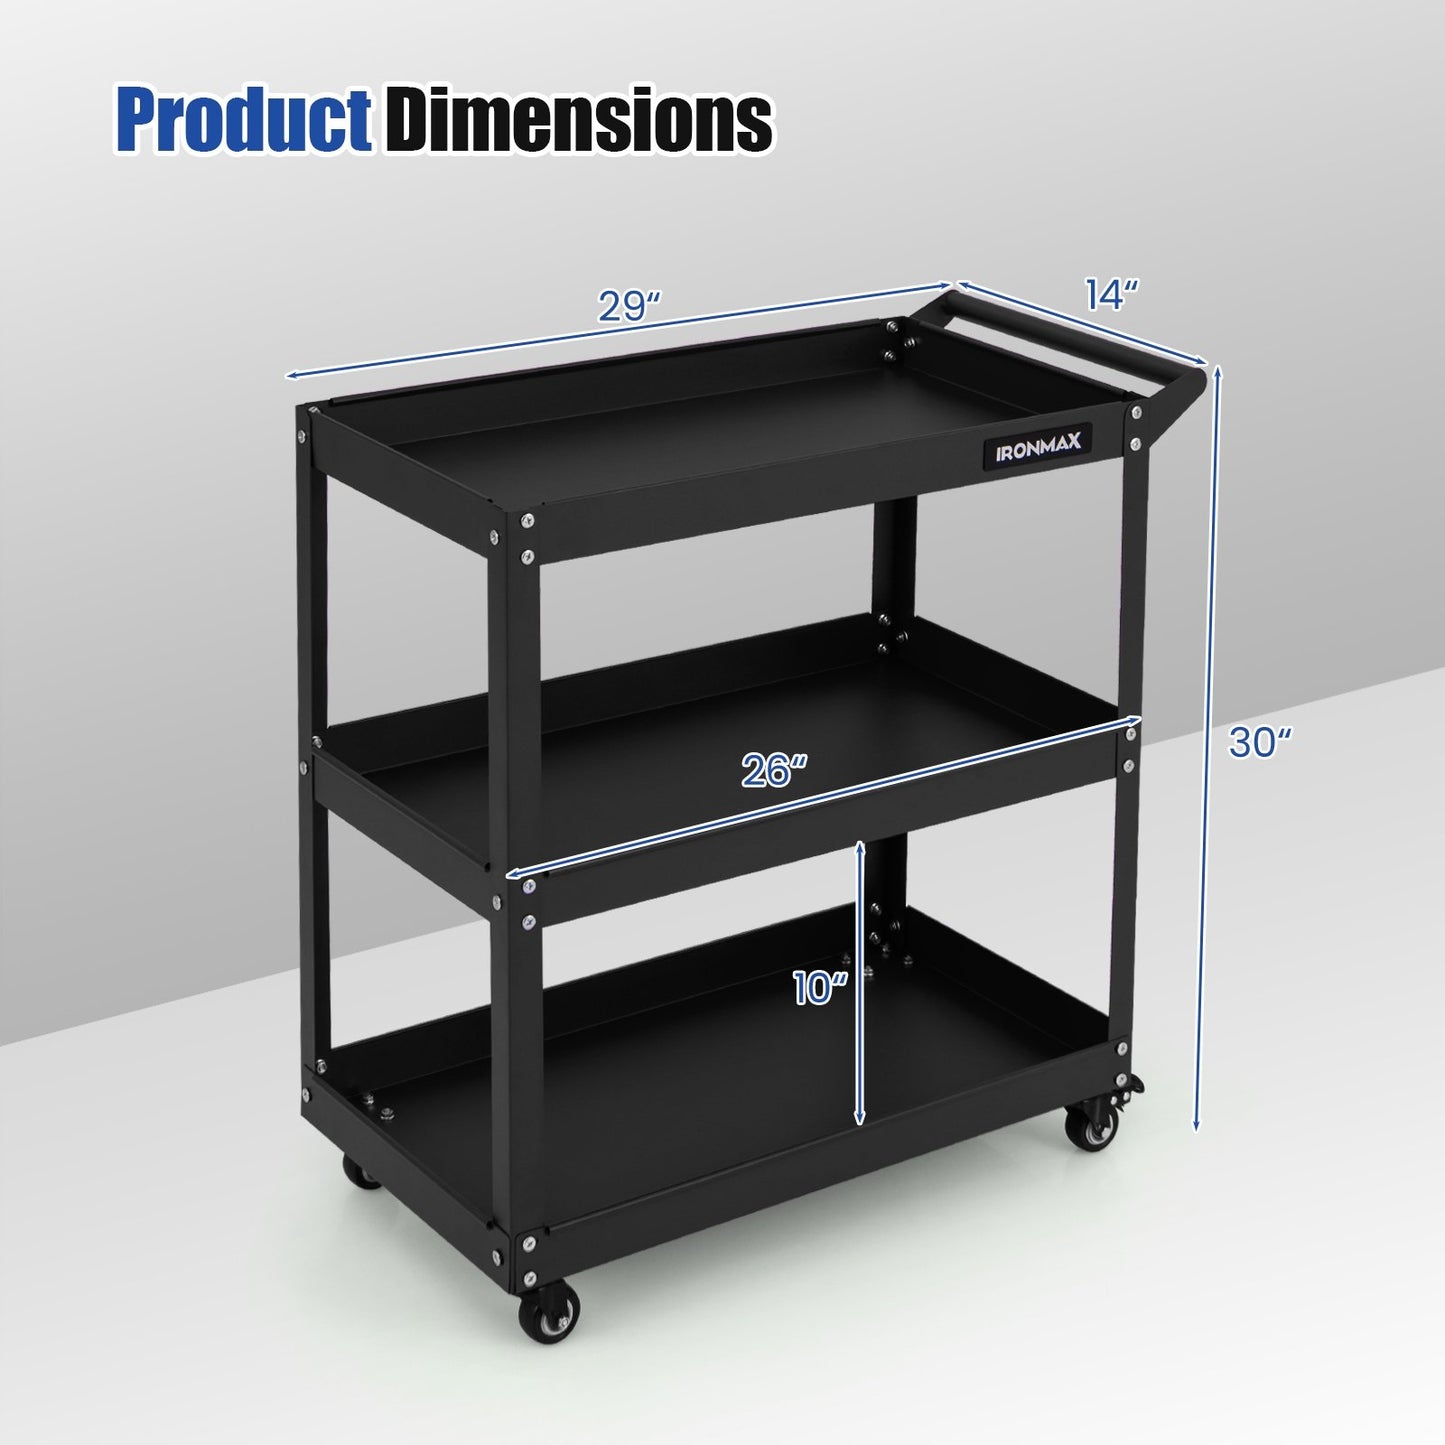 3-Tier Rolling Tool Cart with Spacious Shelves  4 Universal Wheels and 2 Brakes, Black